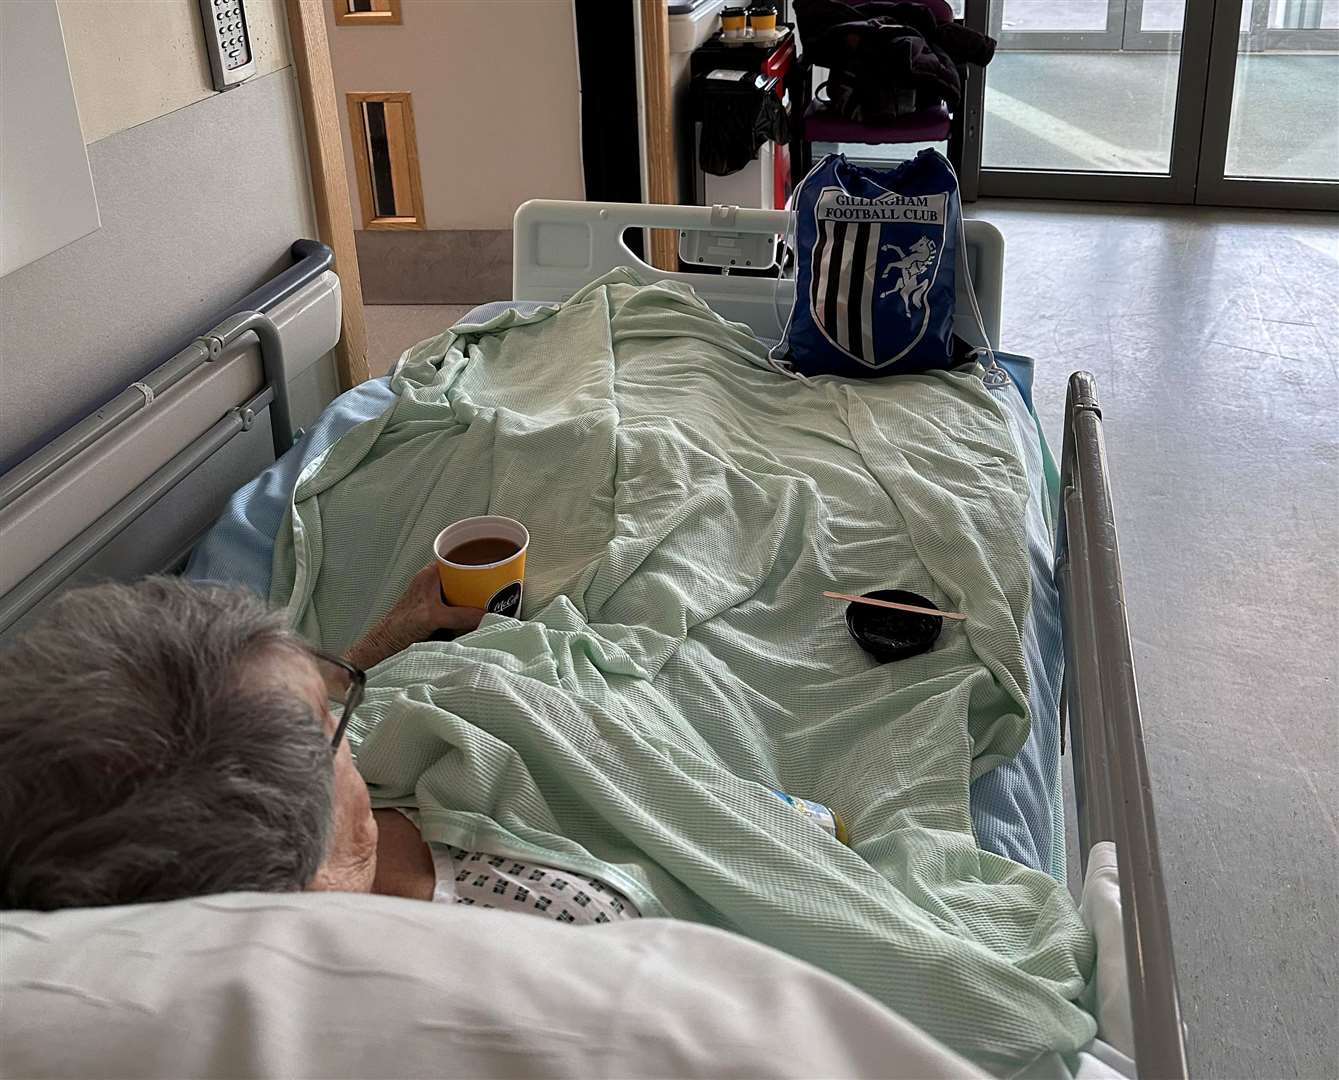 Greta Woolley, 89, had to wait 72 hours for a bed on a ward at Medway Maritime Hospital. Picture: Jayne Woolley